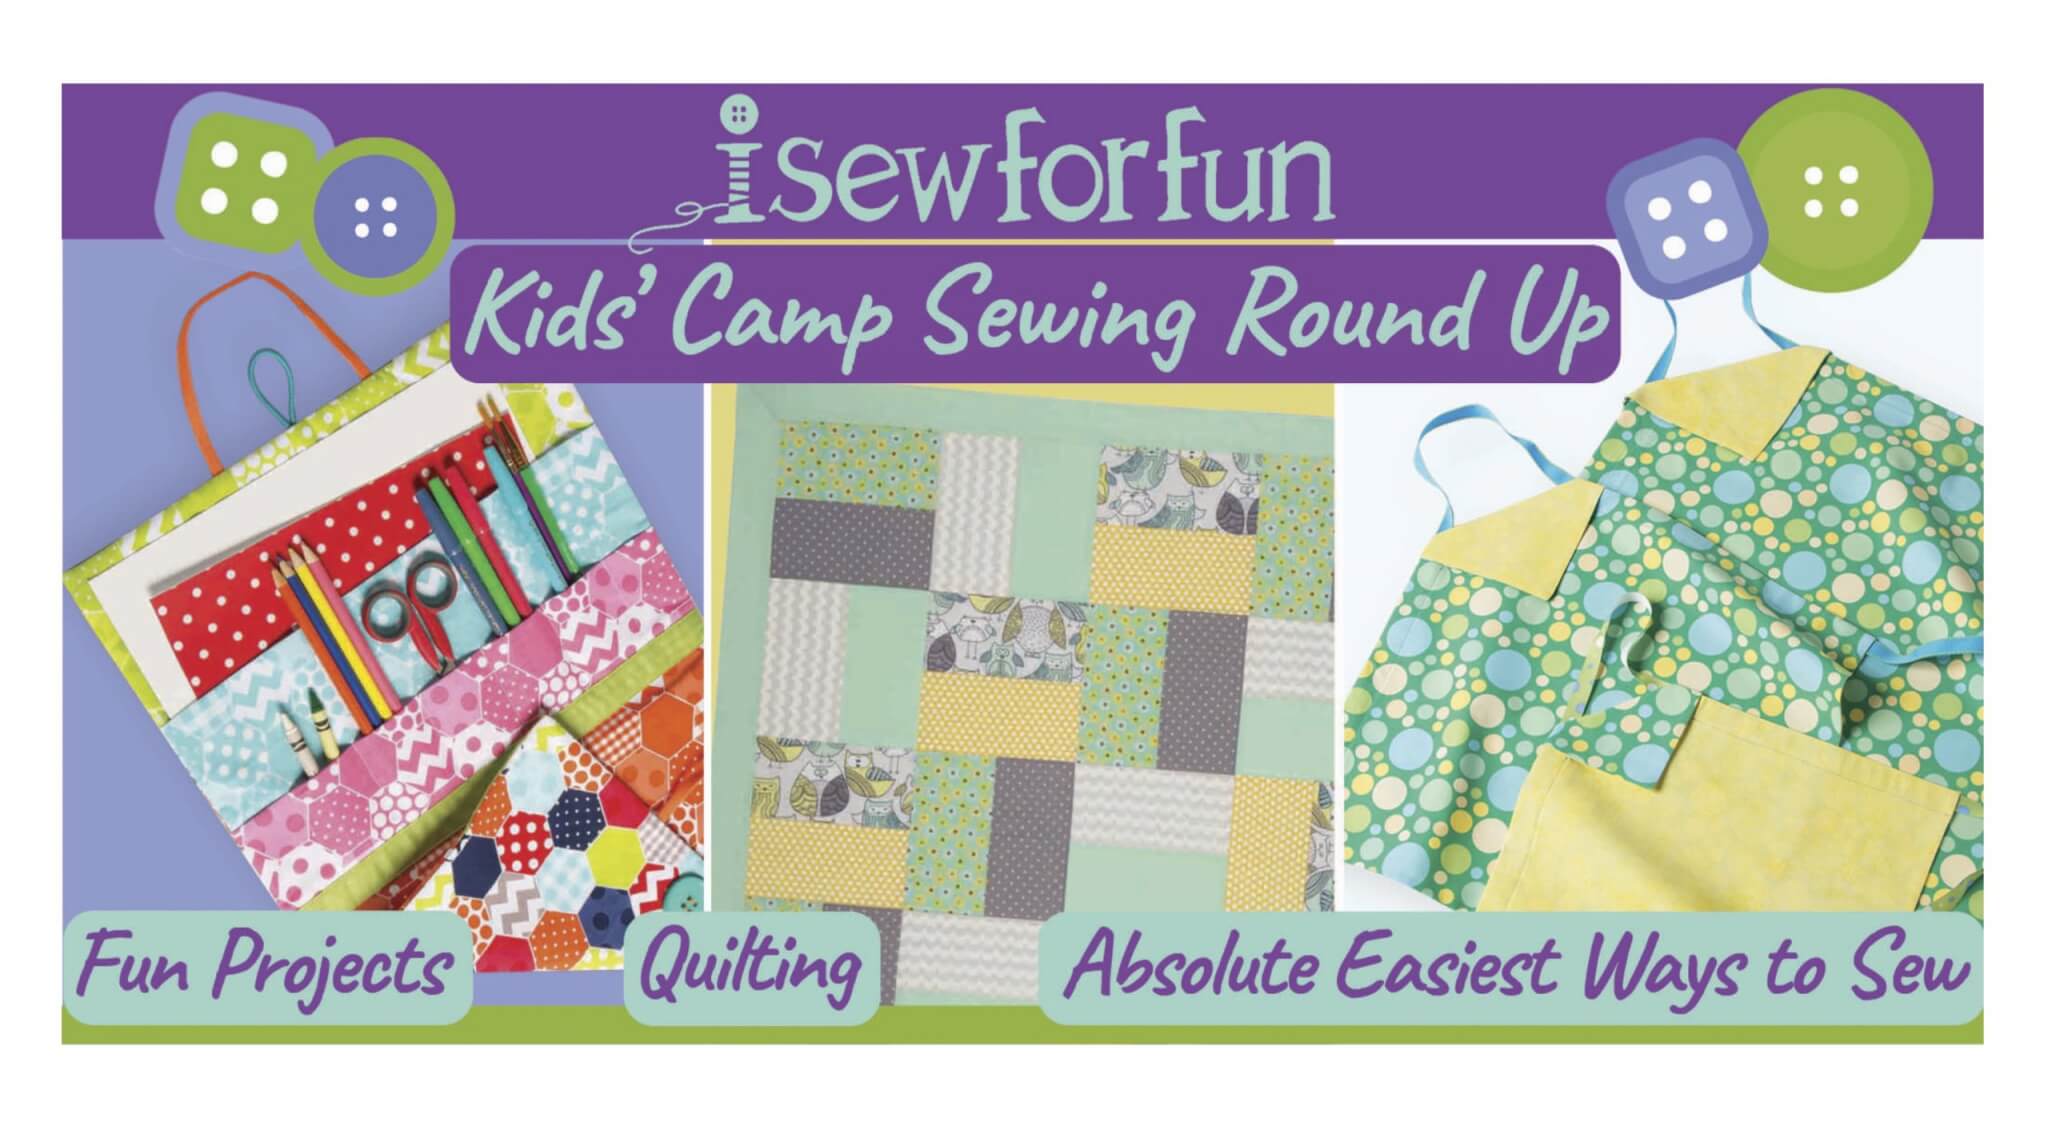 I Sew For Fun Kids Camp Sewing Round Up at The Nancy Zieman Productions Blog